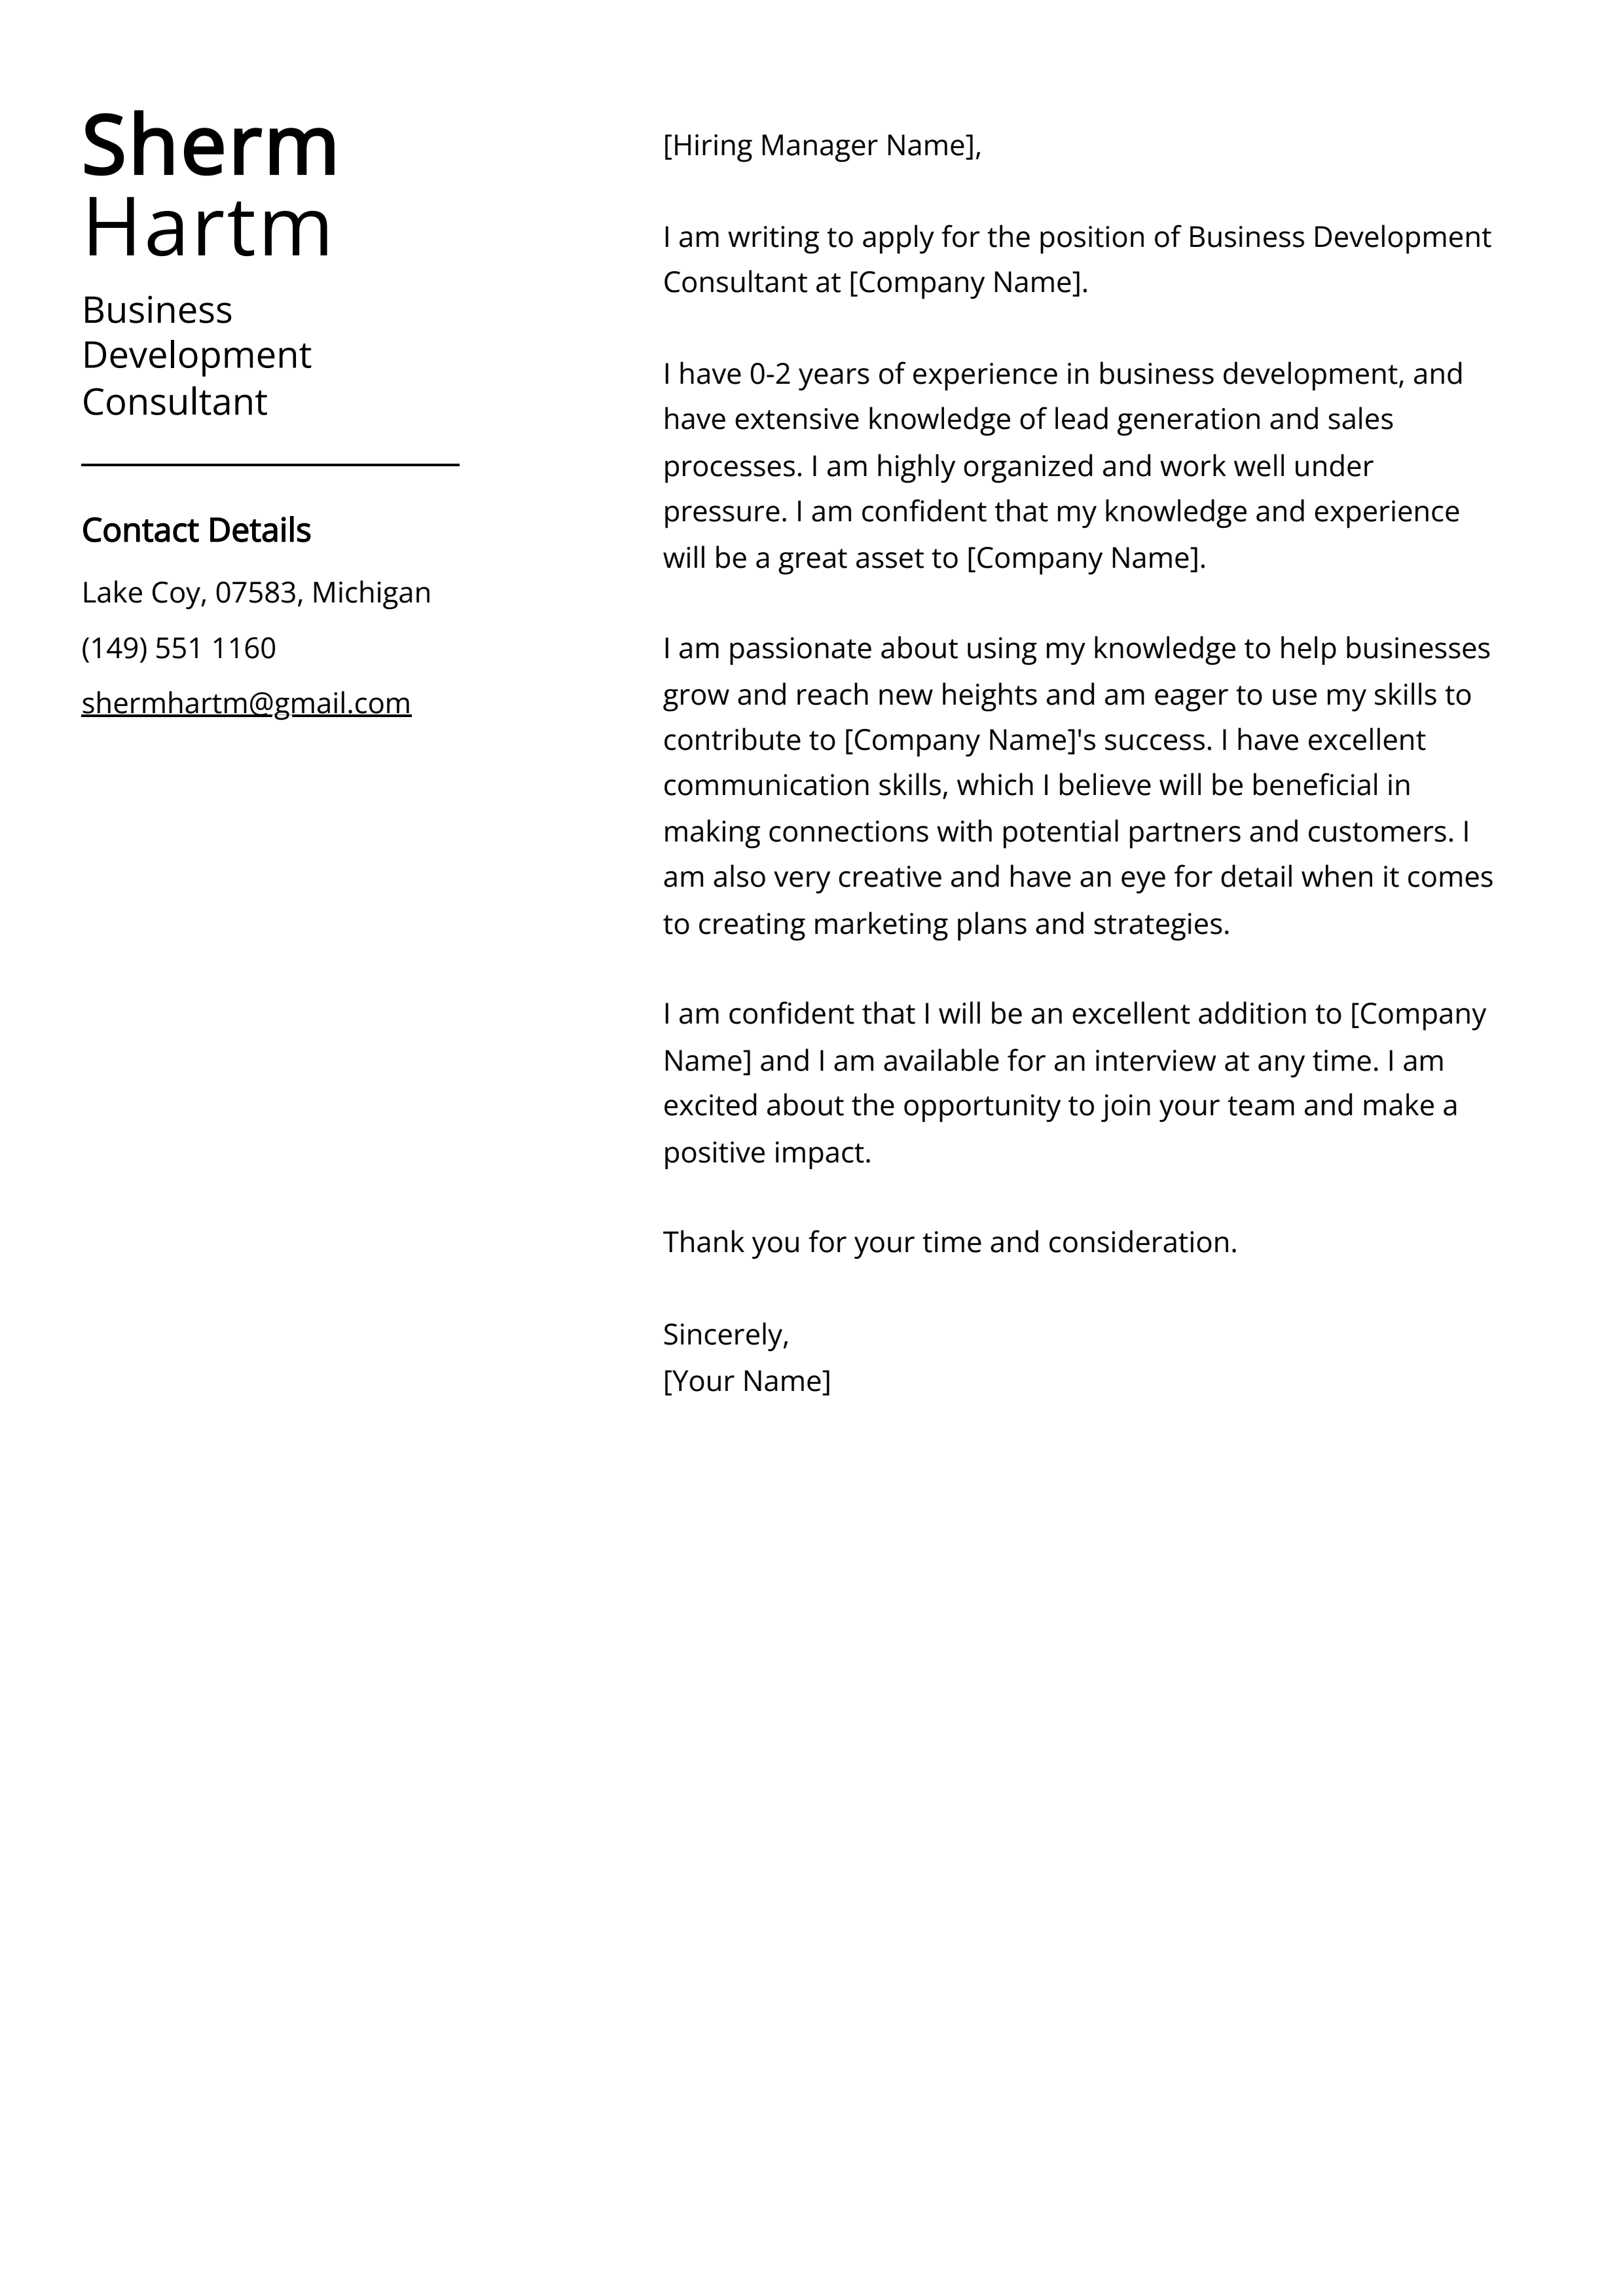 Business Development Consultant Cover Letter Example